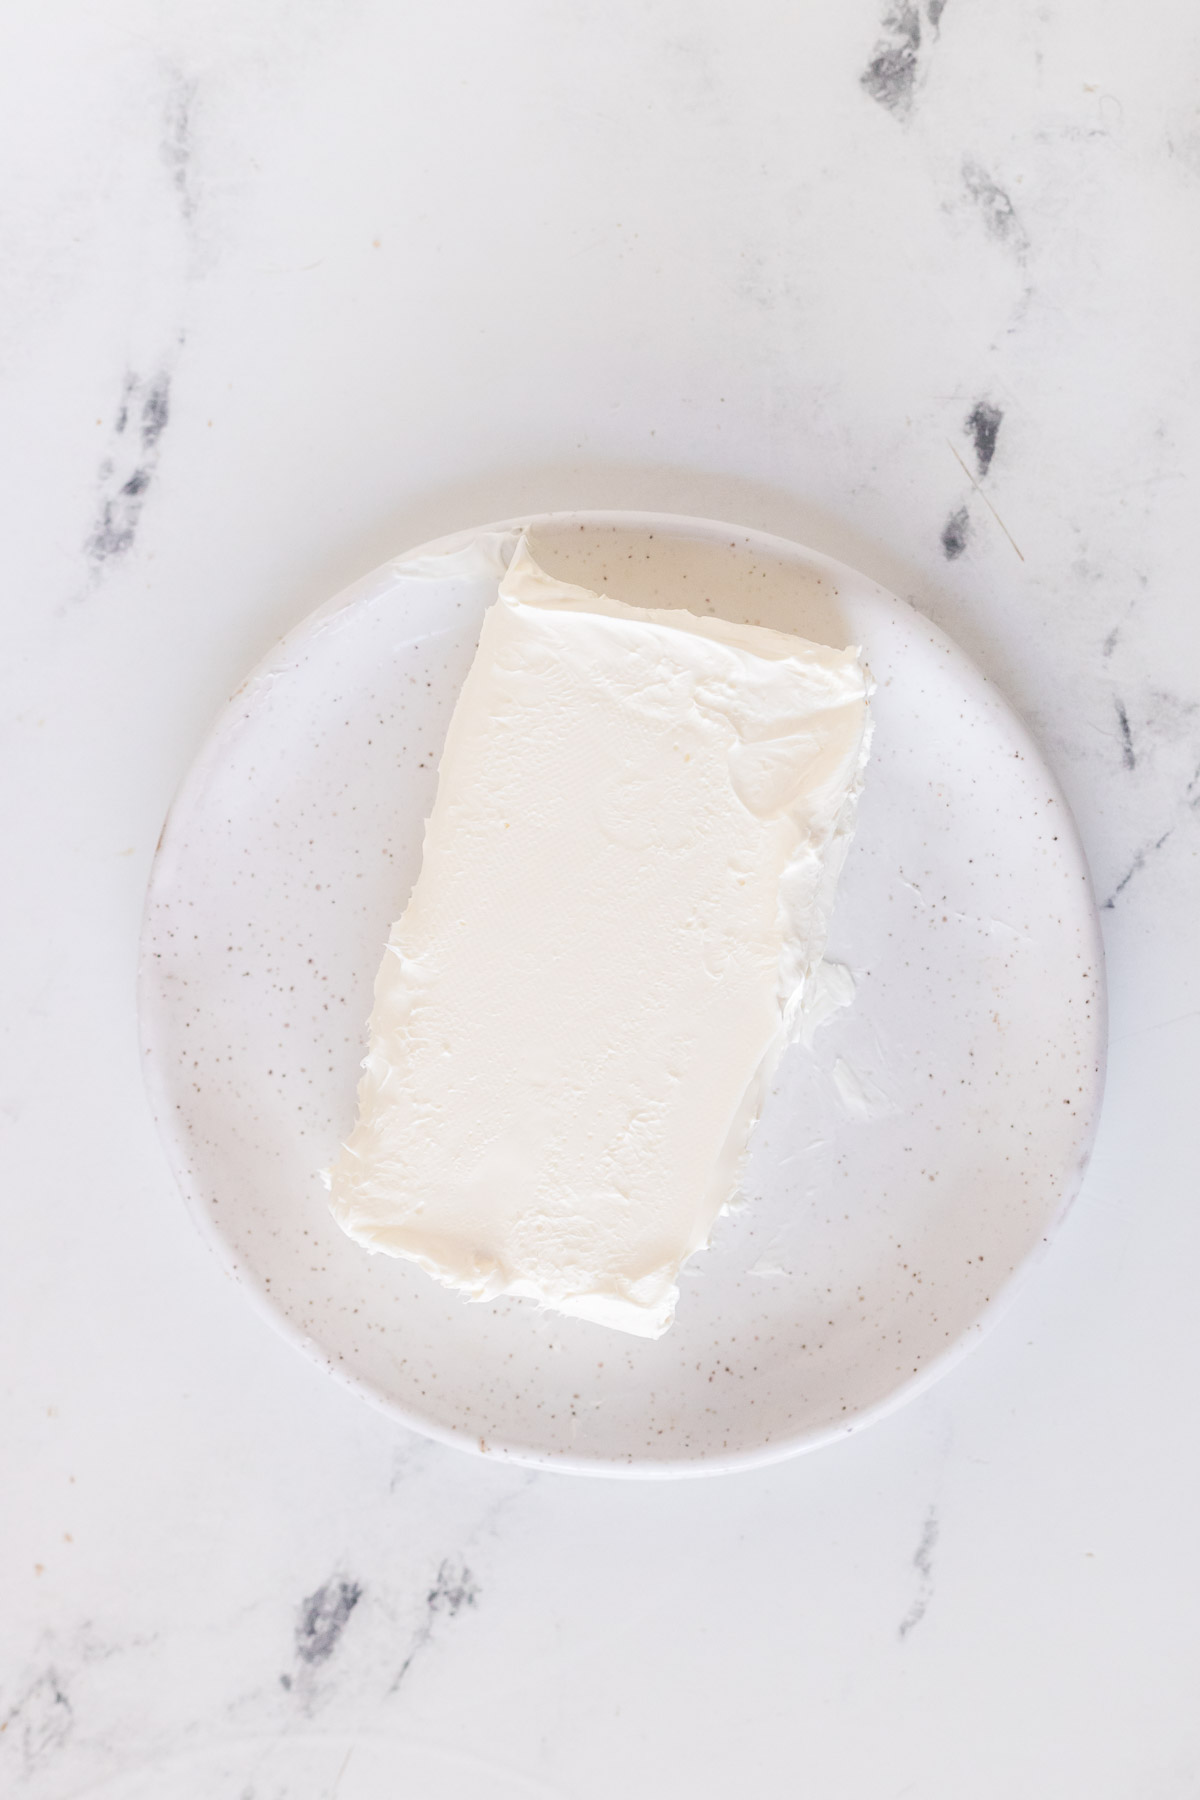 block of cream cheese on a plate